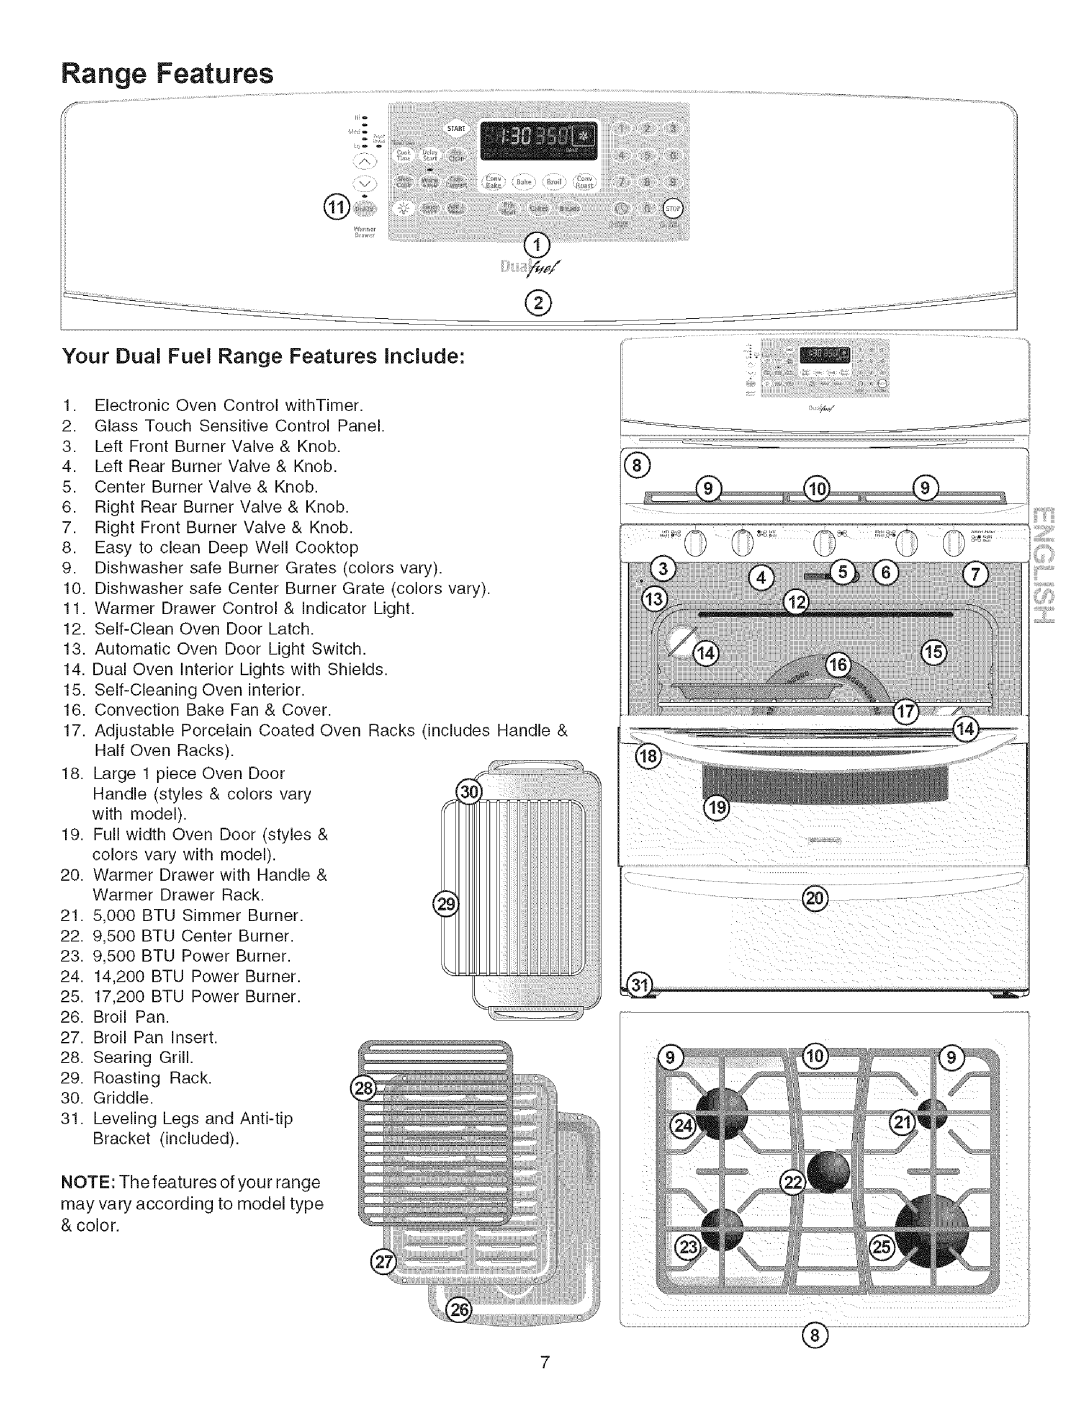 Kenmore 790.7946 manual Your Dual Fuel Range Features Include 